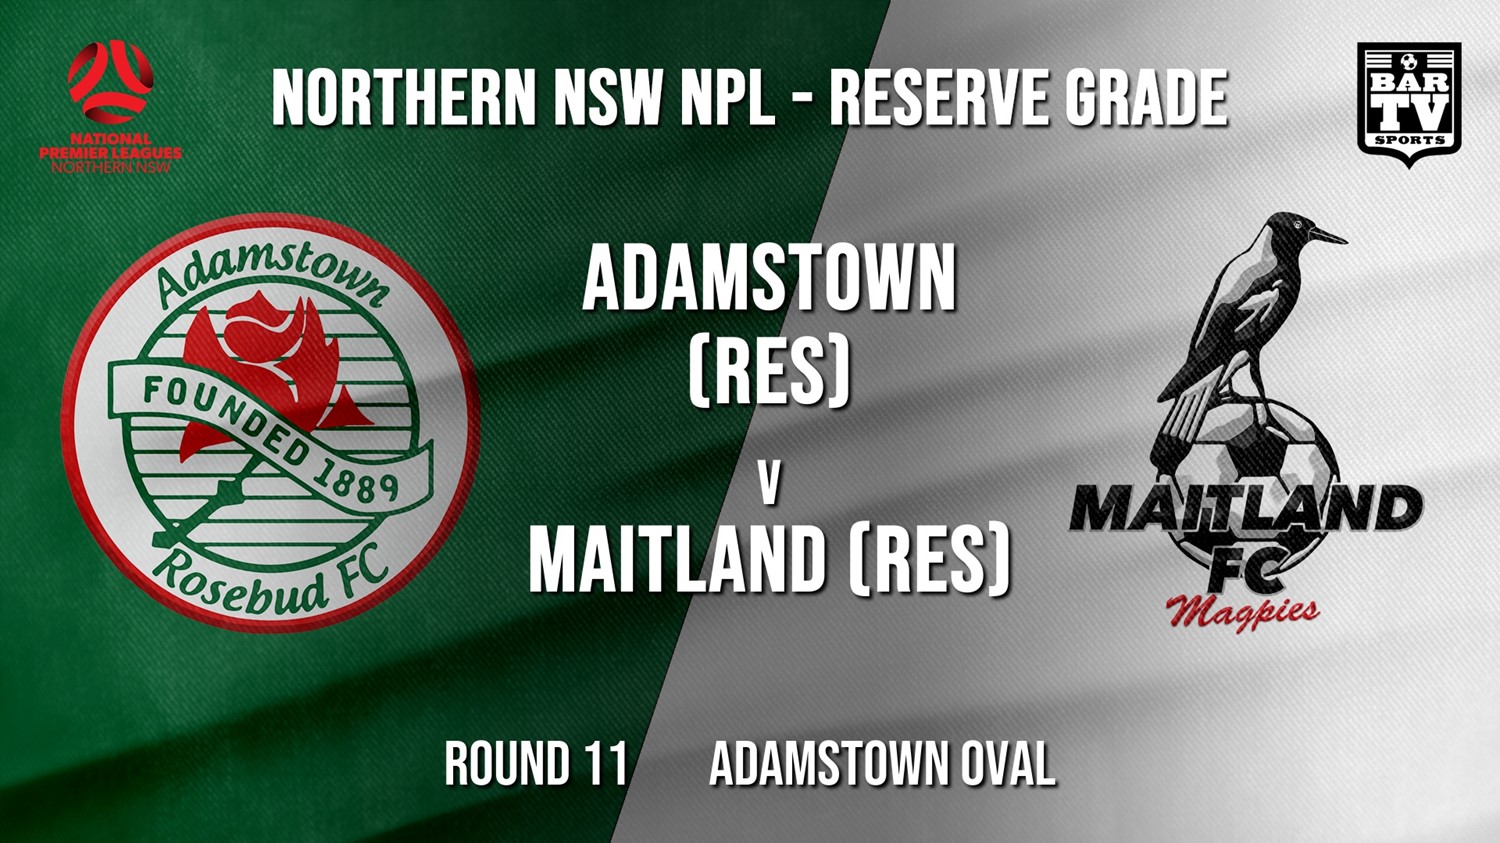 NPL NNSW RES Round 11 - Adamstown Rosebud FC (Res) v Maitland FC (Res) Minigame Slate Image